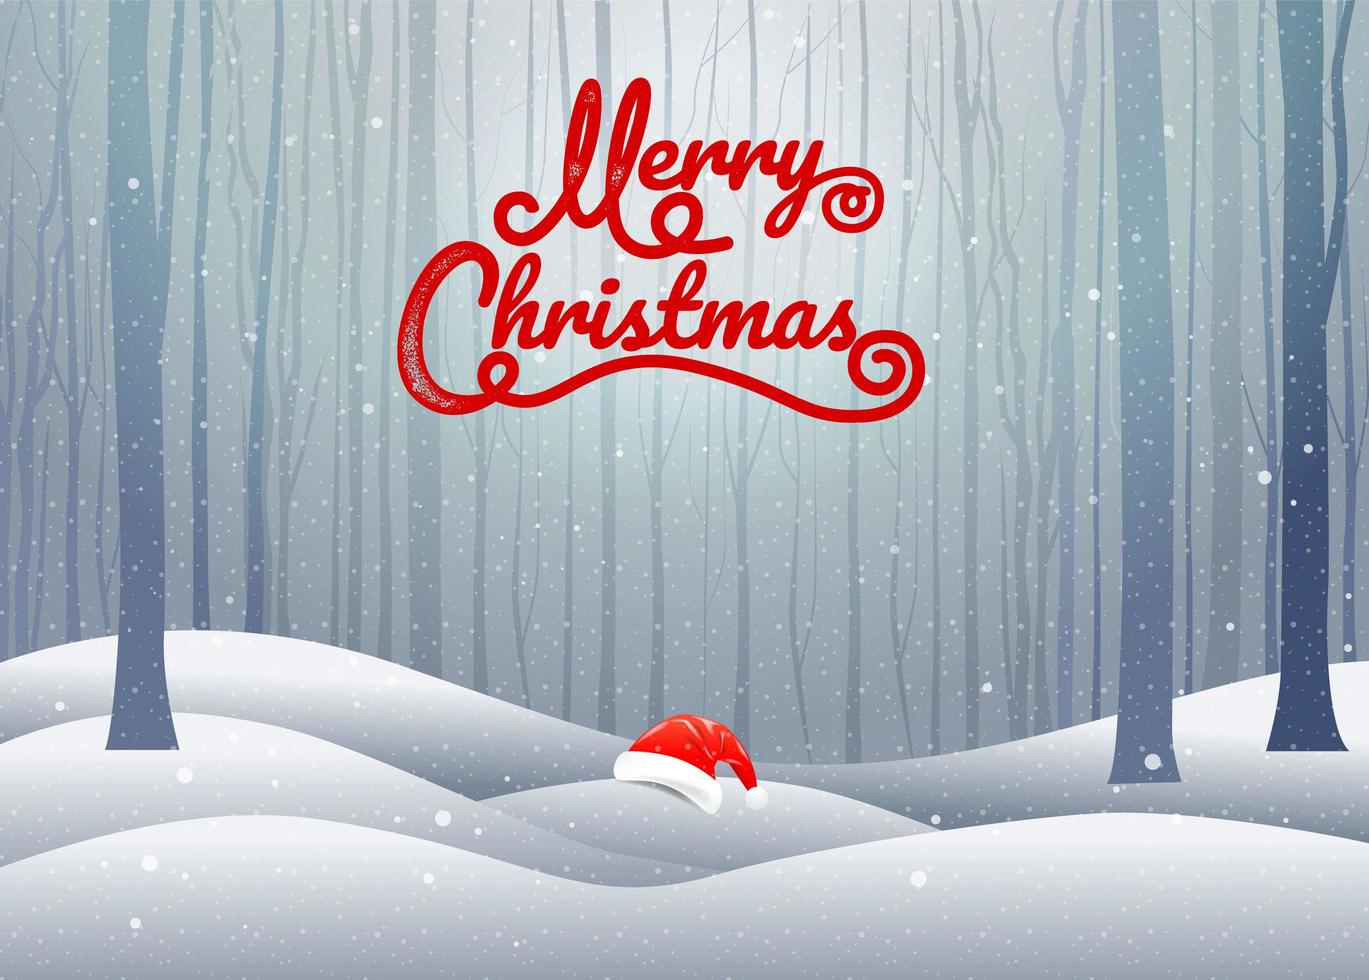 Merry Christmas winter landscape with Santa hat vector